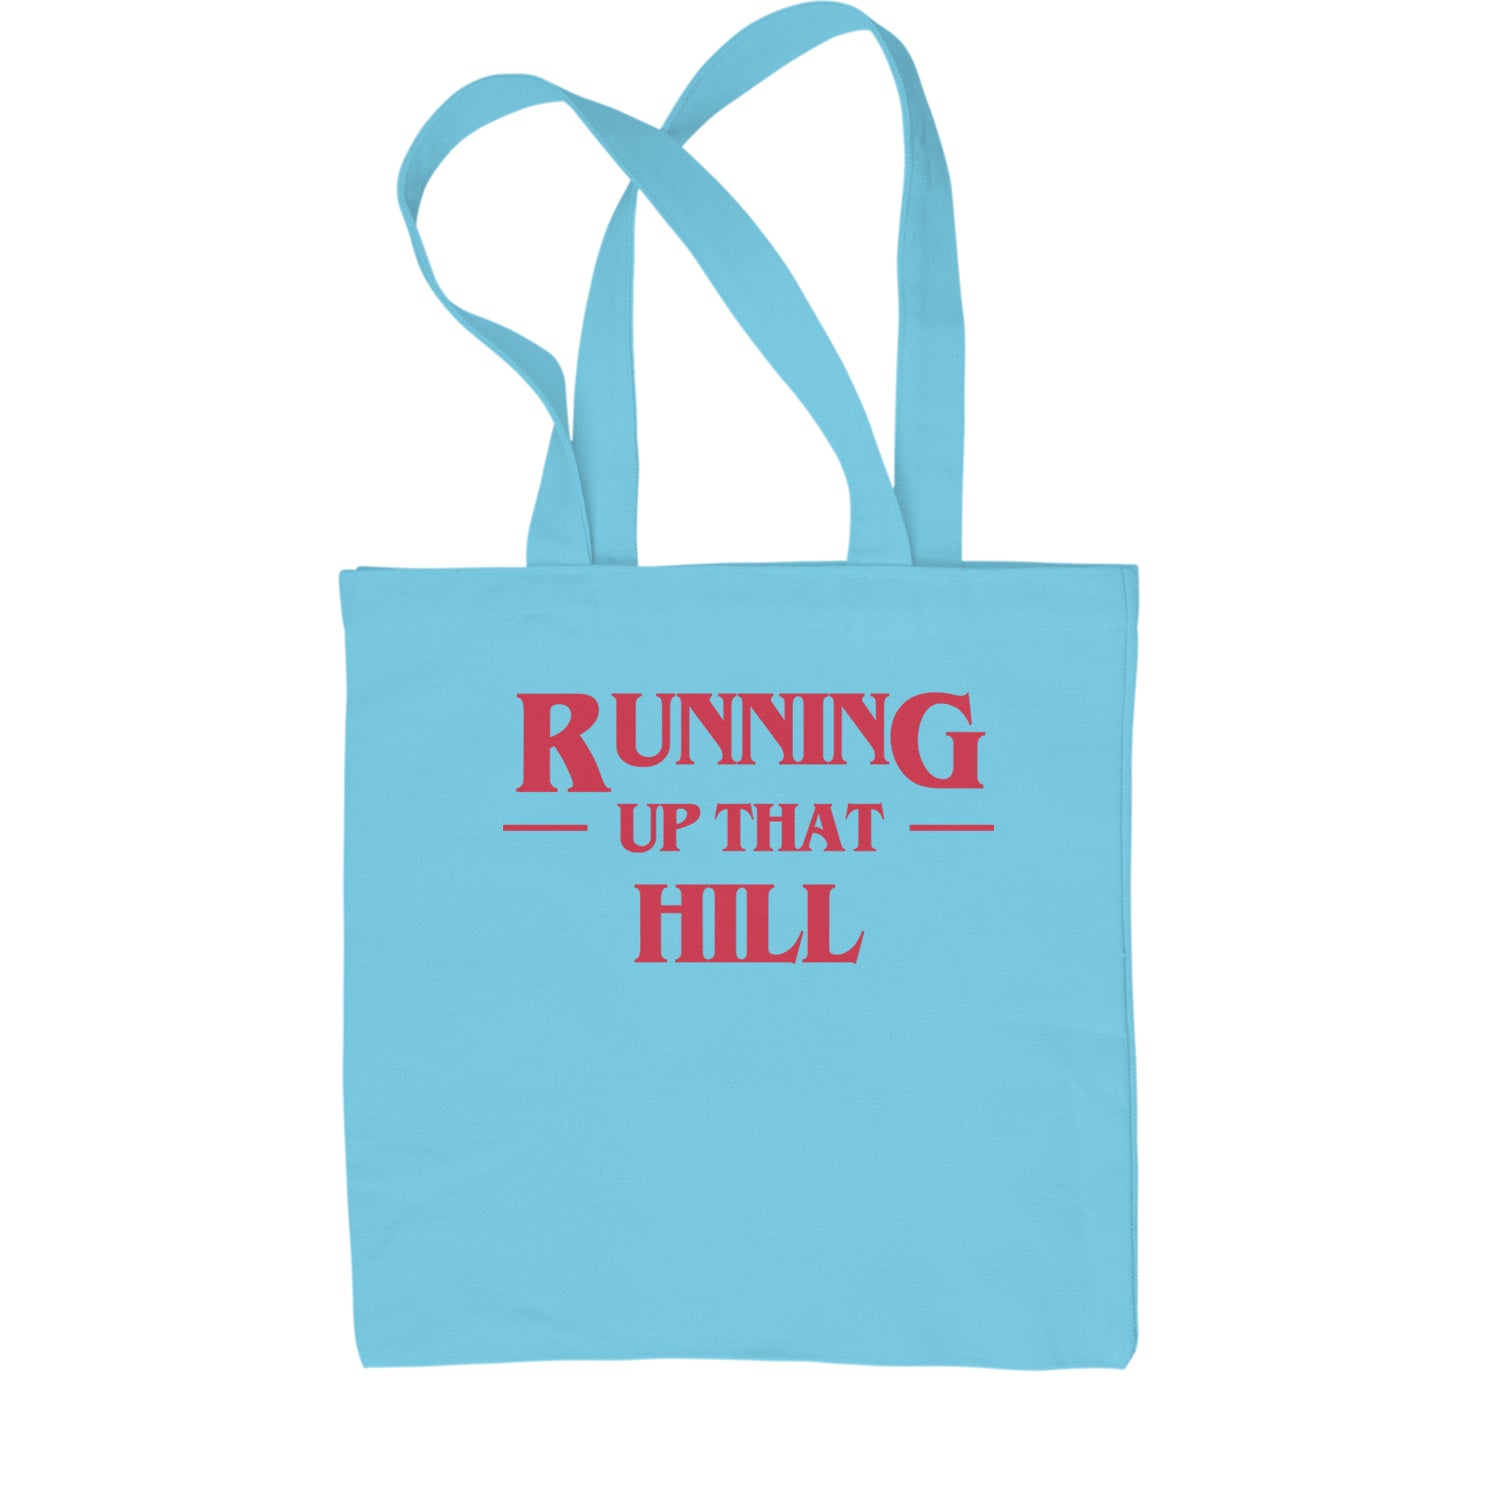 Running Up That Hill Shopping Tote Bag 4, don’t, eleven, four, friends, lie, season by Expression Tees